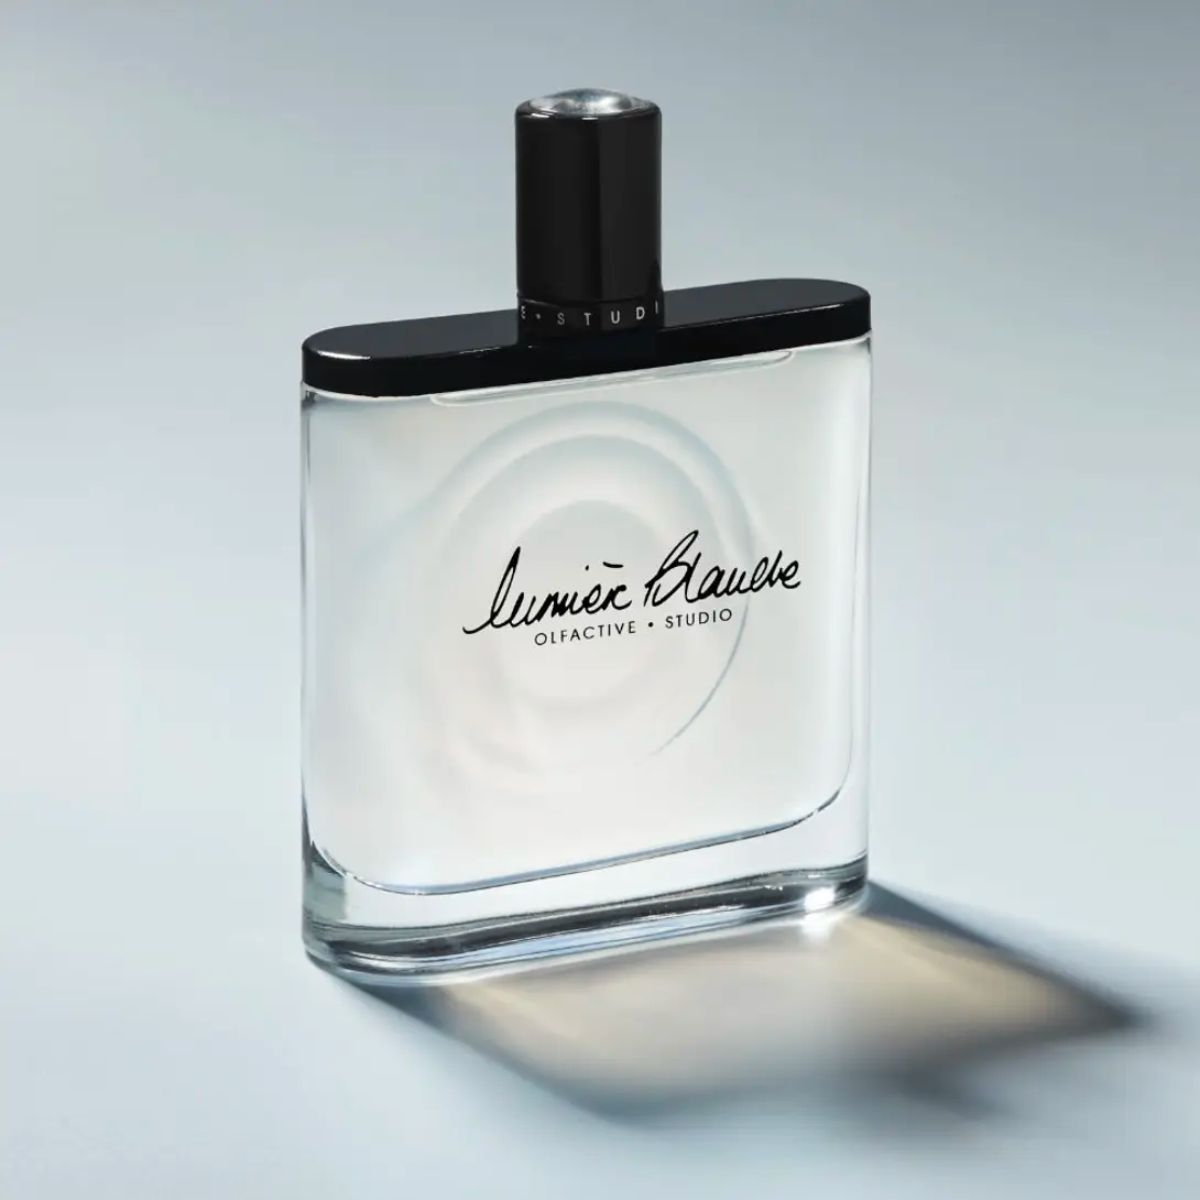 Image of Lumiere Blanche 100 ml by Olfactive Studio